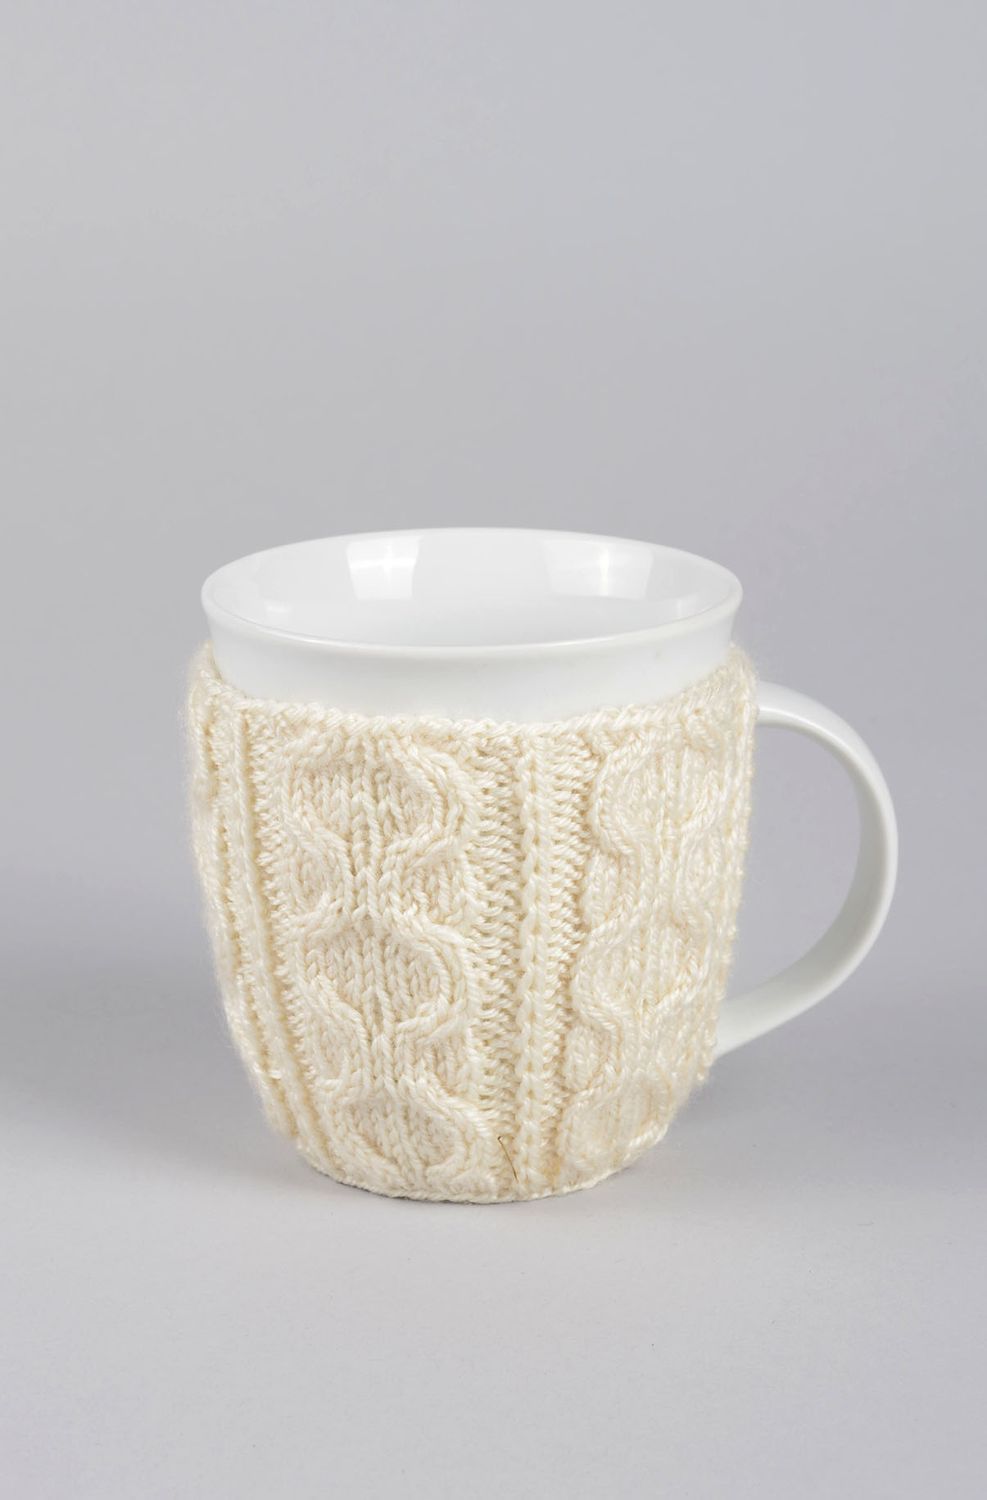 White ceramic porcelain tea or coffee cup with knitted cover with classic pattern photo 1